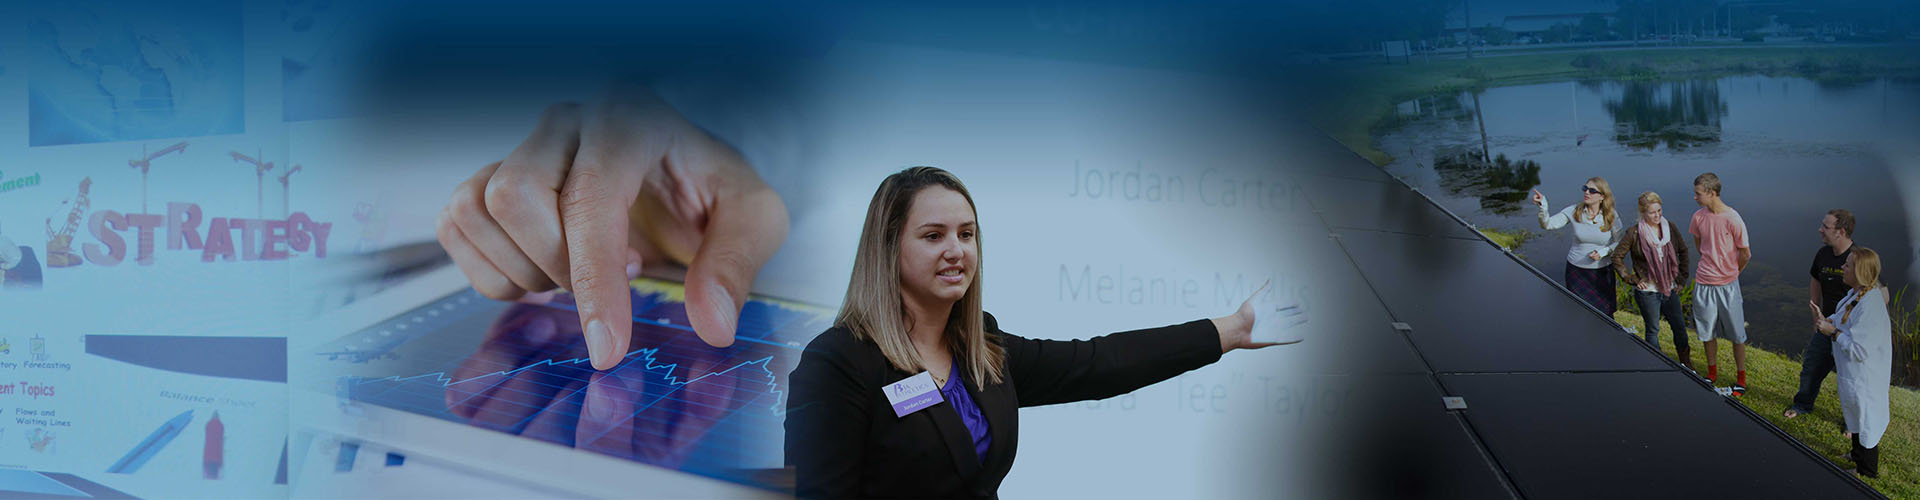 A collage of a person's hand pointing to a graphic on a tablet, a woman in business attire giving a presentation, and a group of students looking at and learning about solar panels